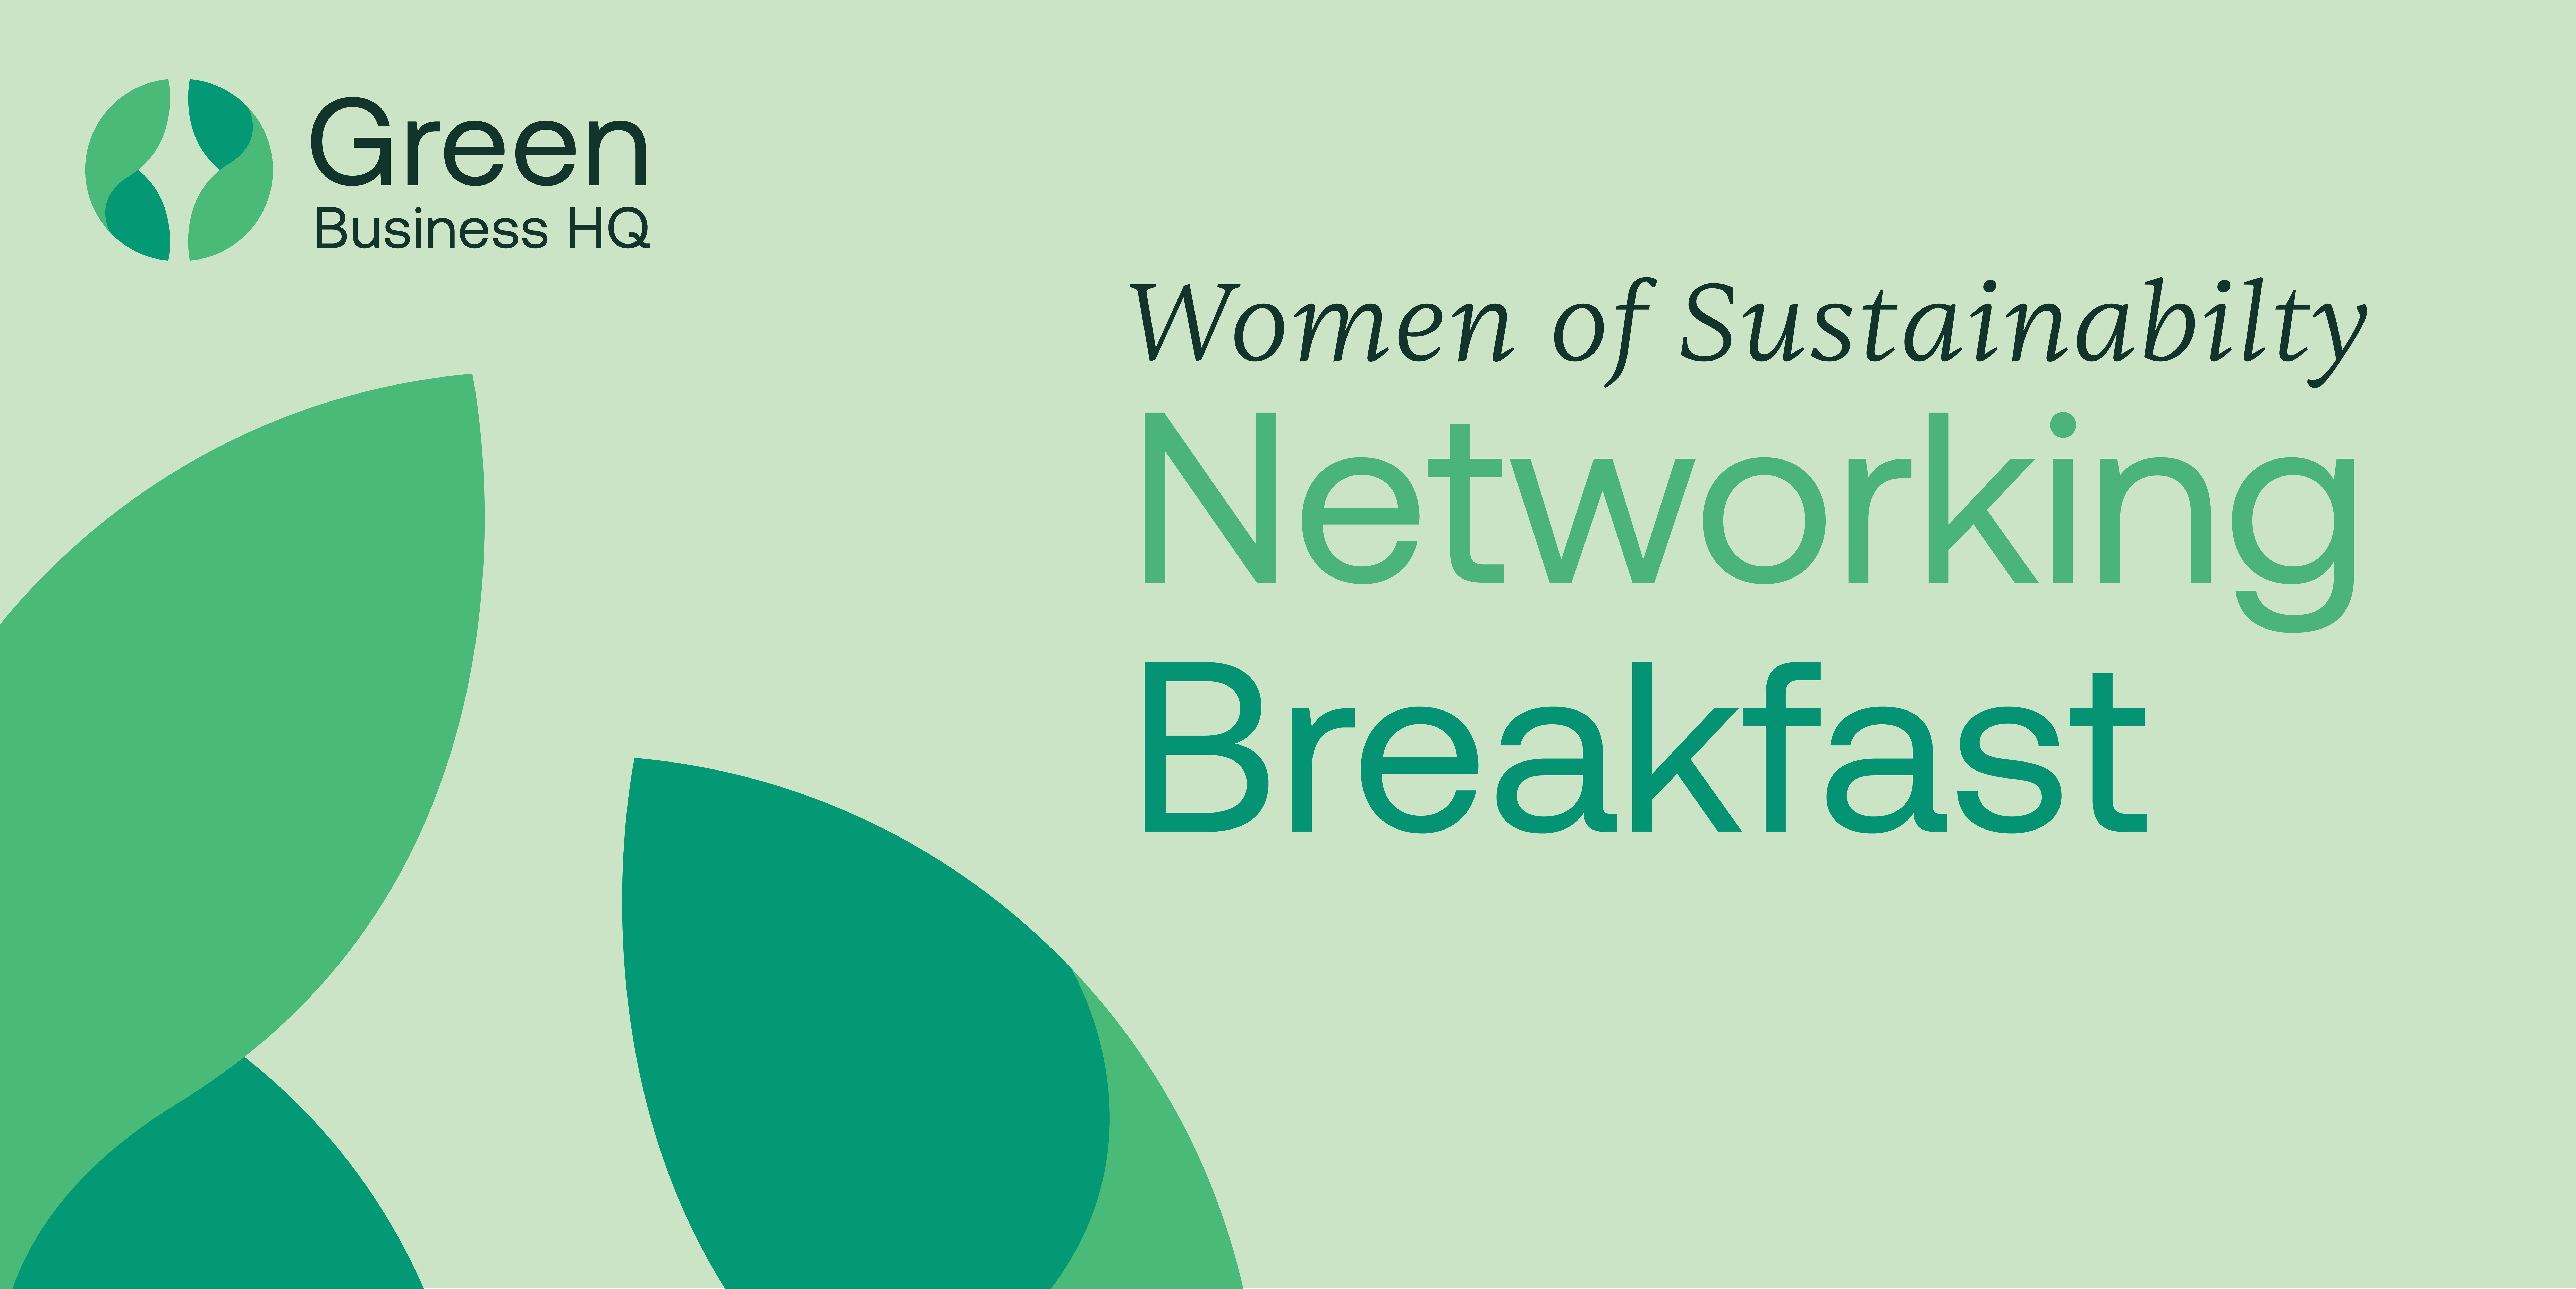 Women of Sustainability Networking Breakfast, Green text with Green Business HQ logo and leaf shapes.